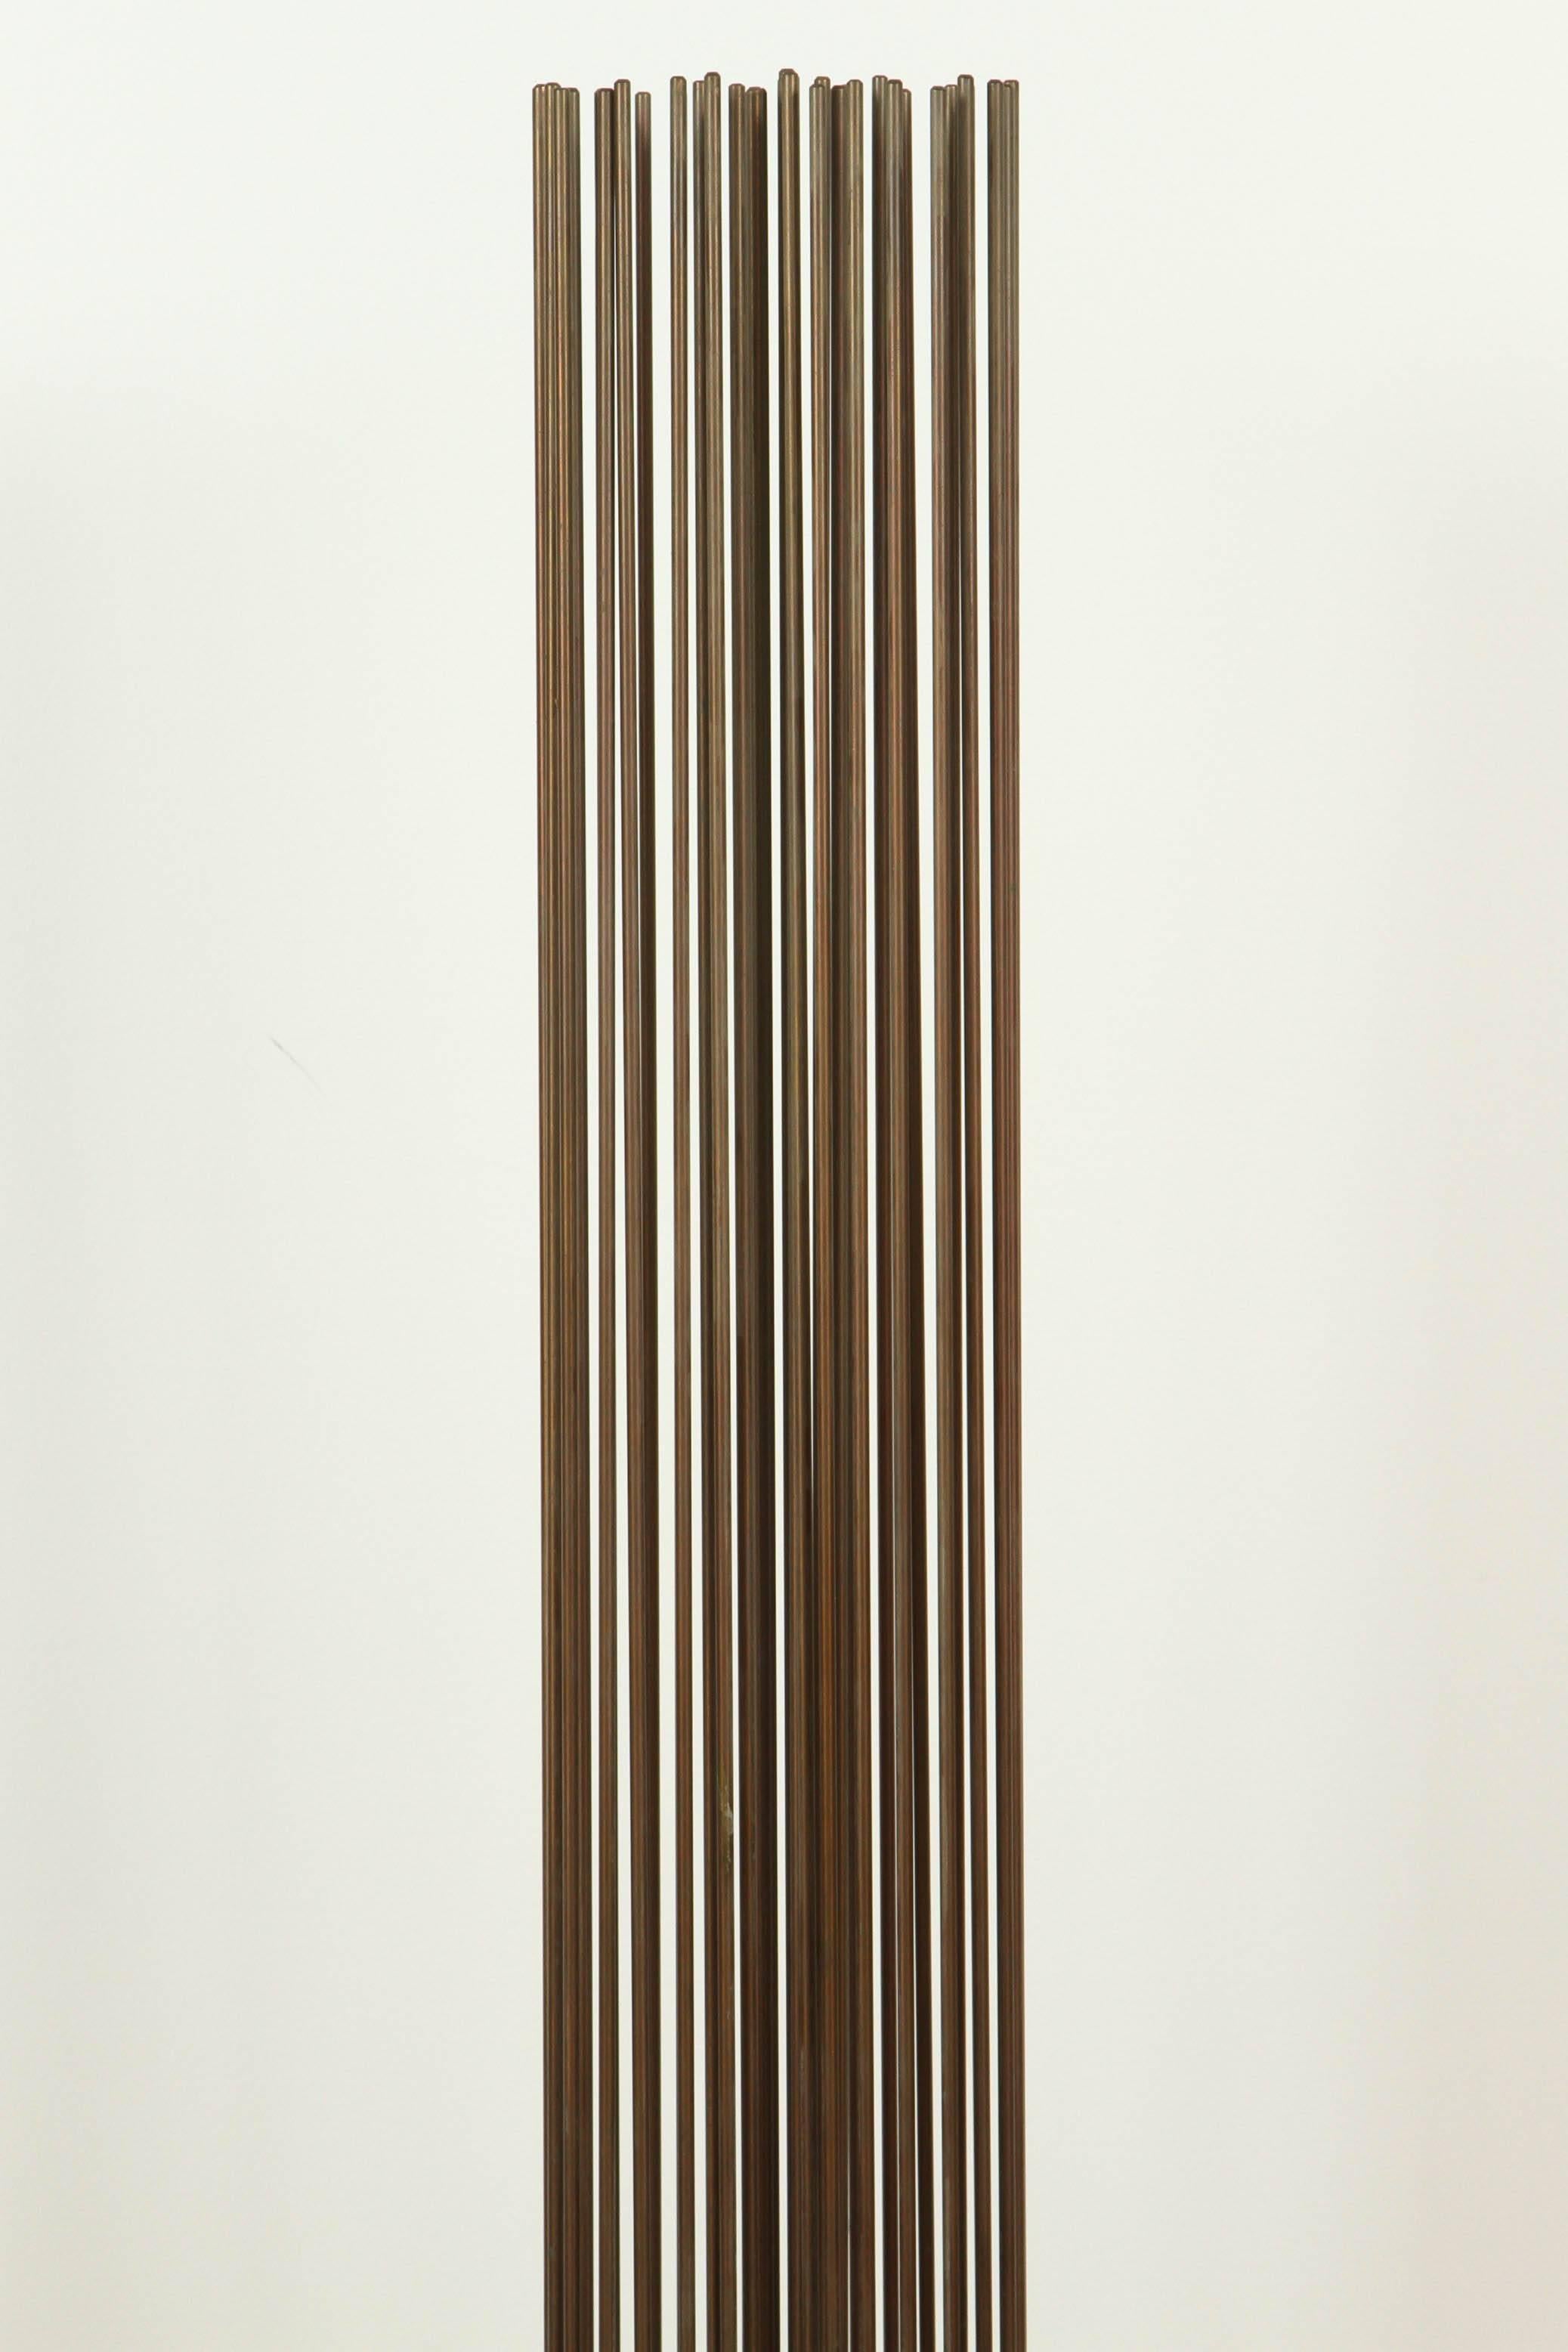 Vertical bronze sculpture with sonambient style flexible rods. Impressed B-1038 to base. From a Manhattan, NY estate. Dimensions: 6